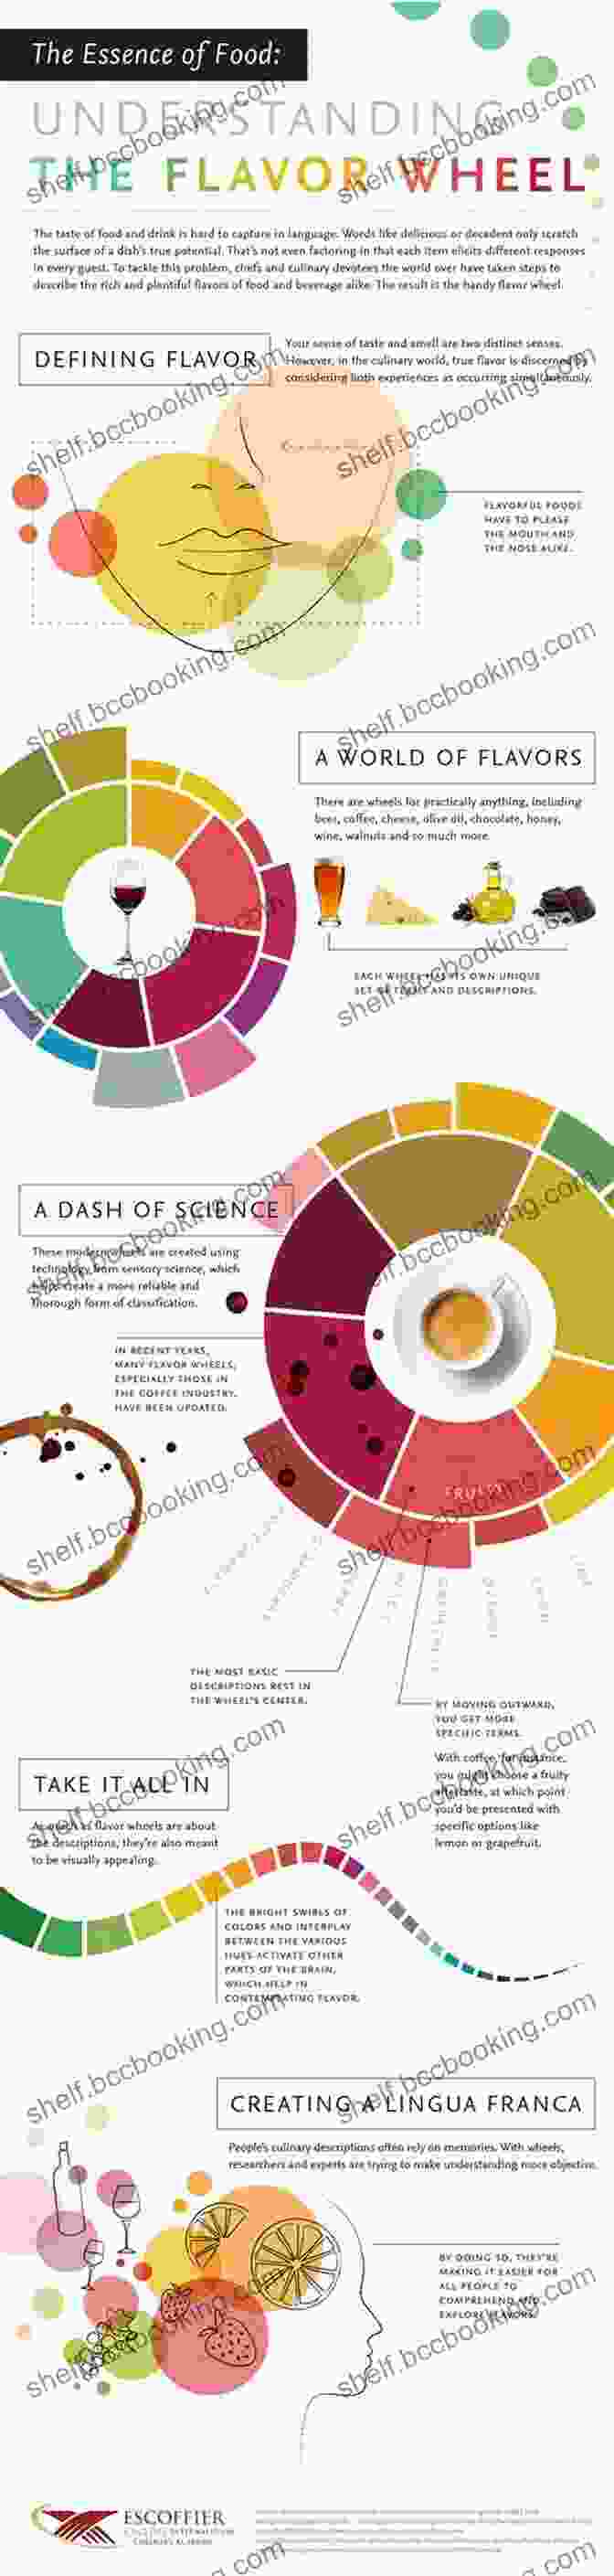 Become A Maestro Of Flavors With The Culinary Palette As Your Guide The Flavor Matrix: The Art And Science Of Pairing Common Ingredients To Create Extraordinary Dishes